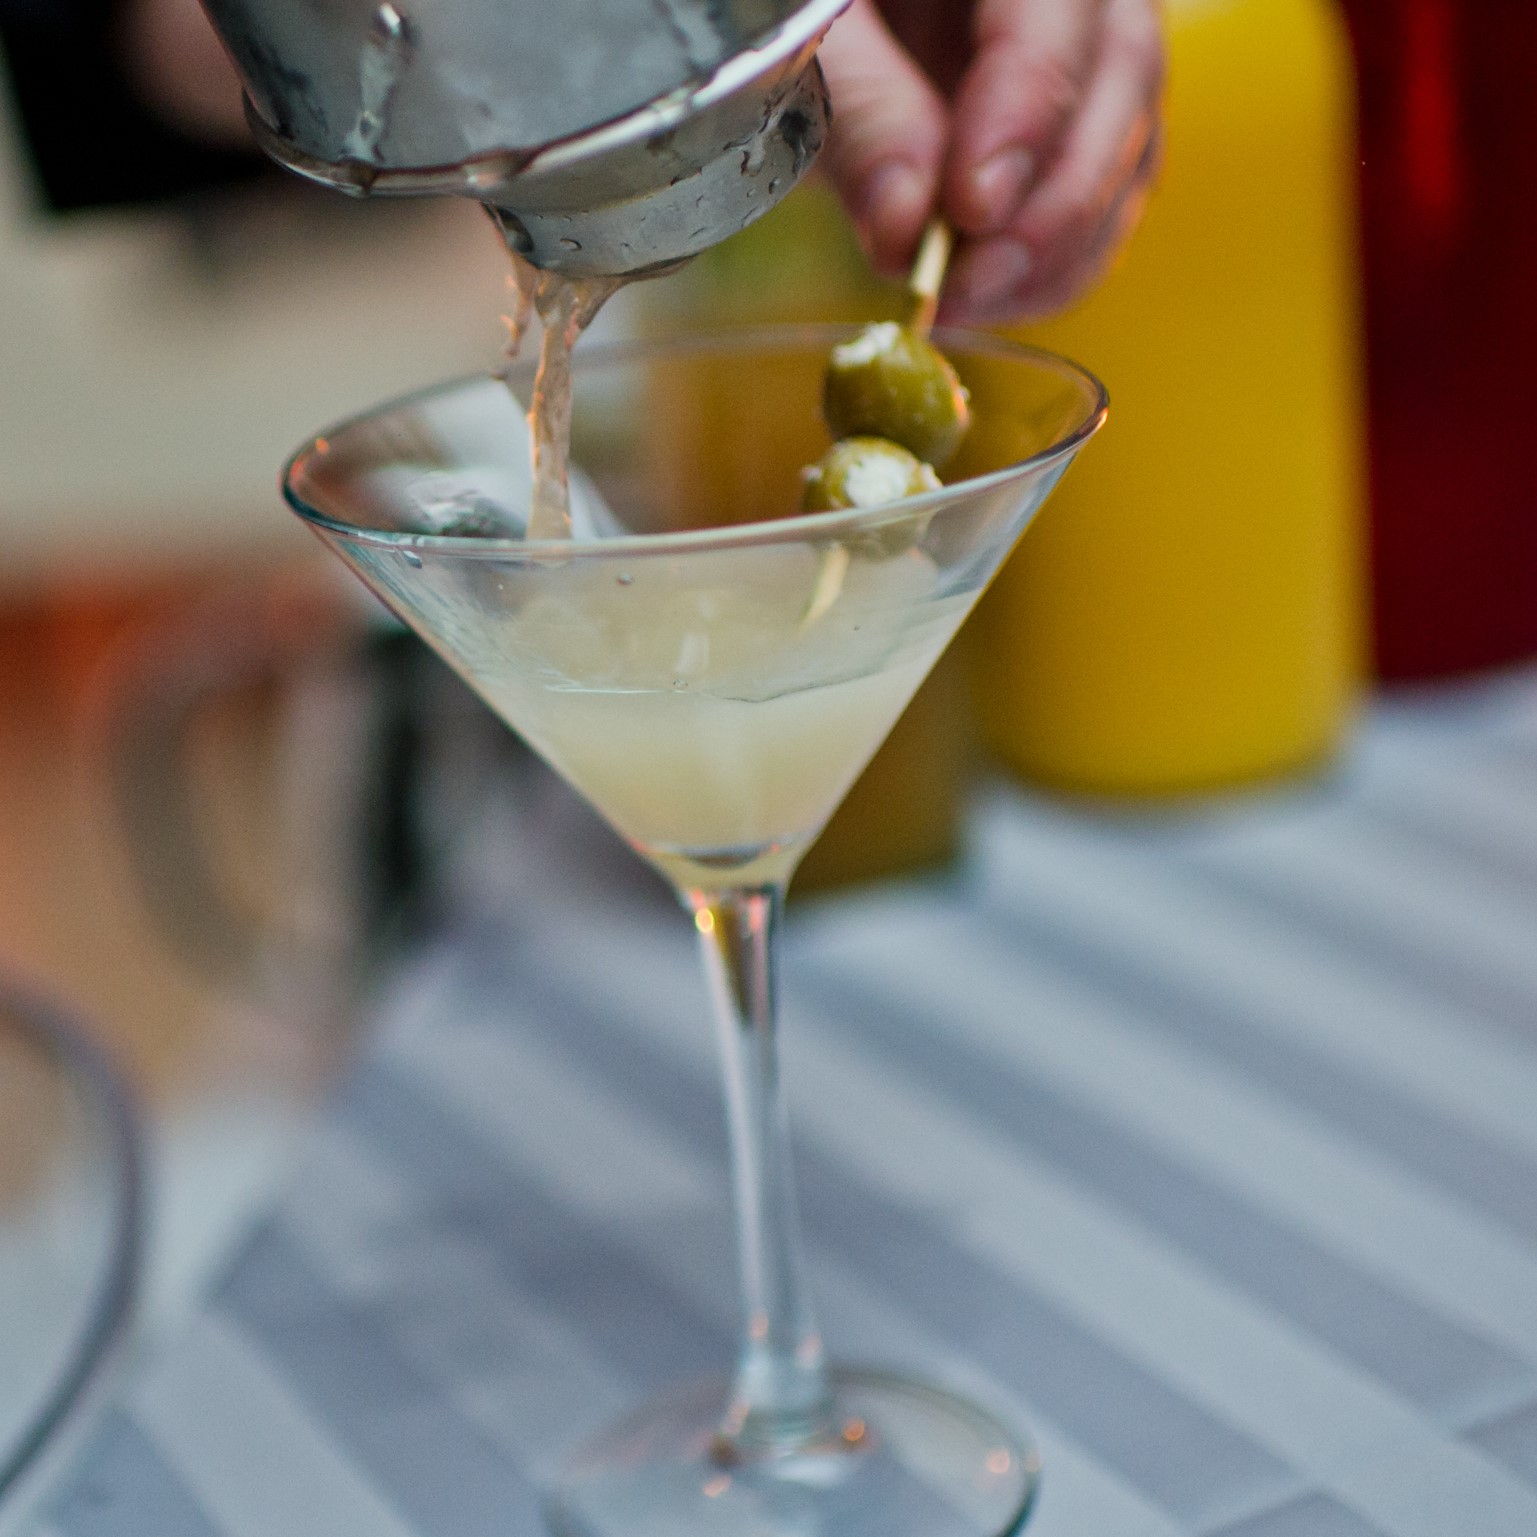 Round it out with our Bar + Beverage Liquor Catering Services